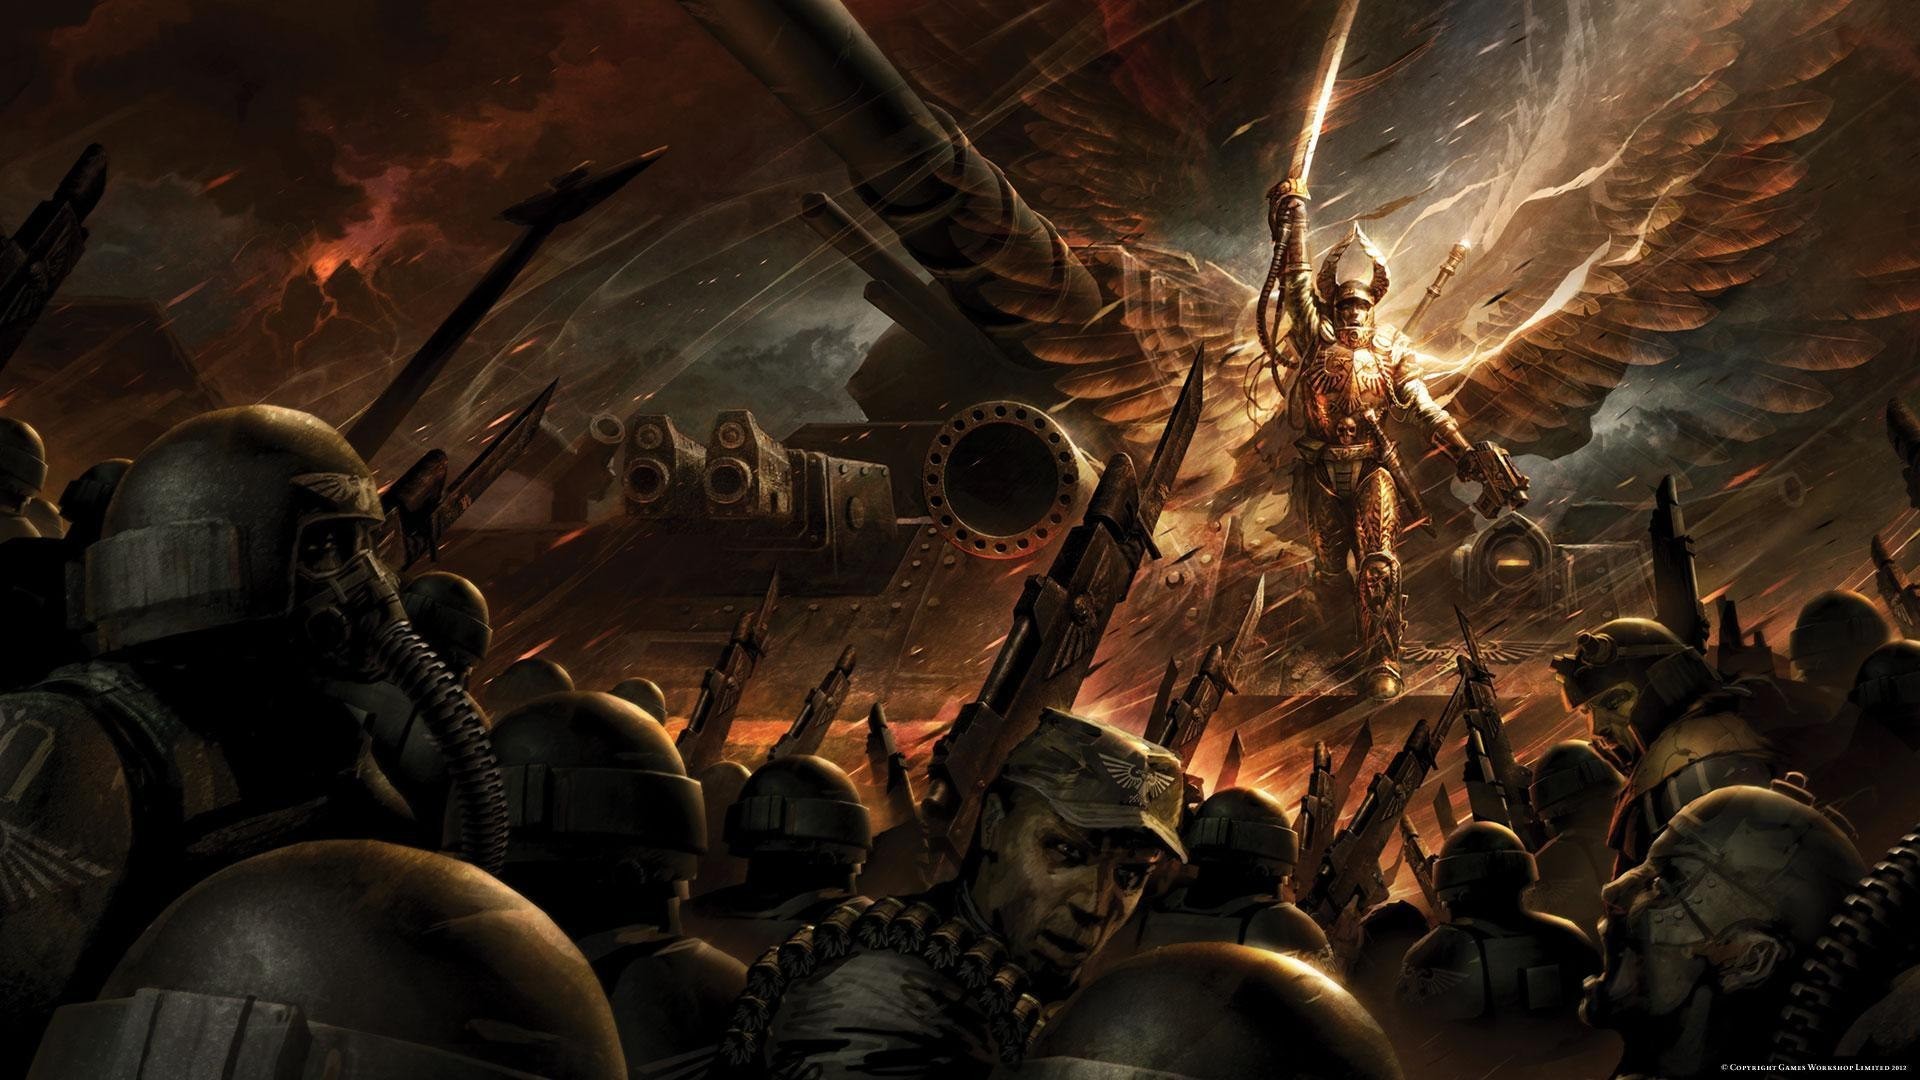 1920x1080 Explore Warhammer 40000, Solar, and more! Imperial Guard wallpaper